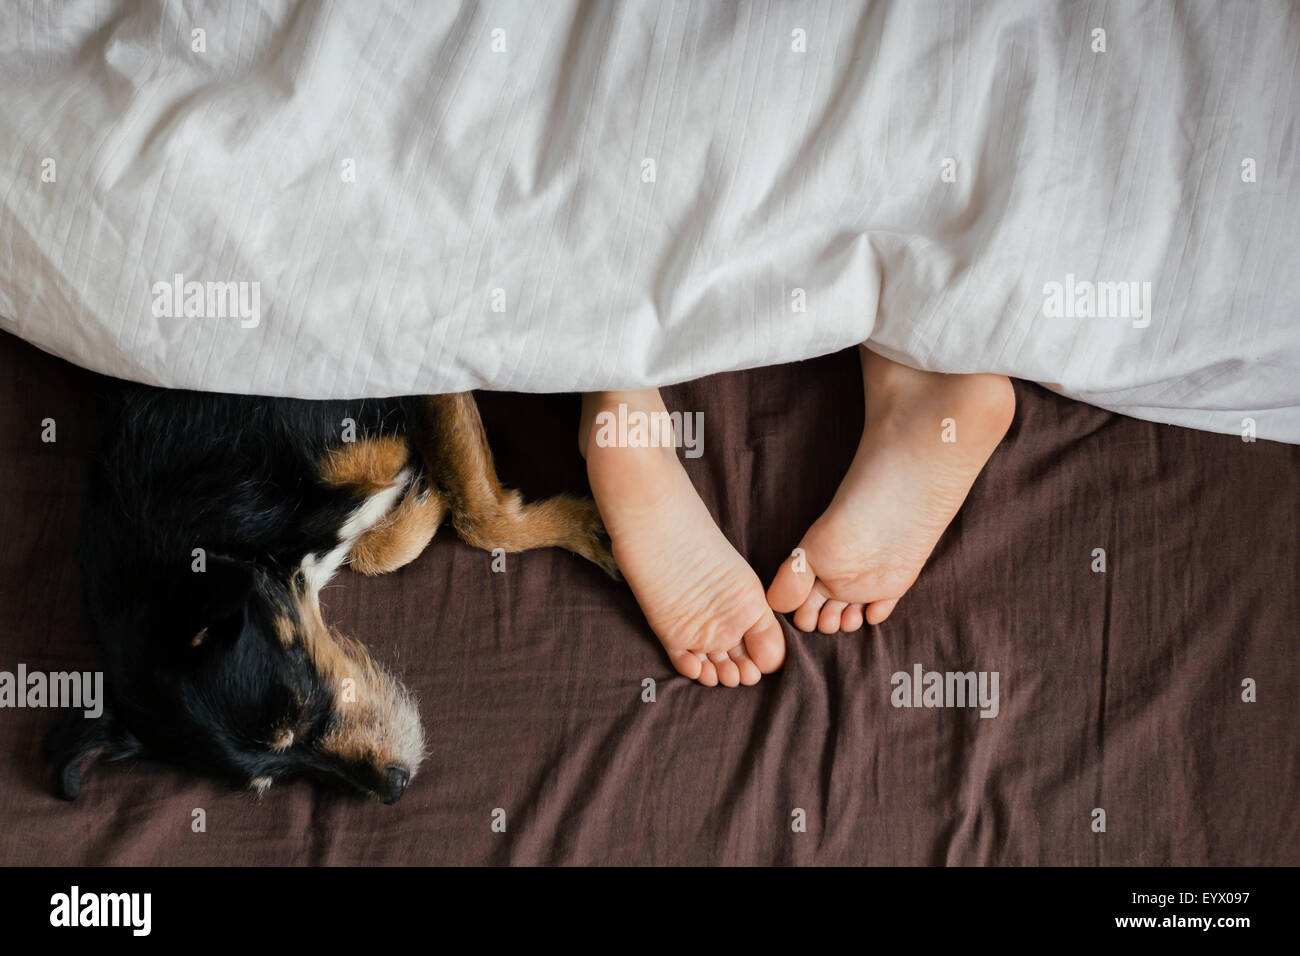 Child sleeping together with a dog in bed. Stock Photo